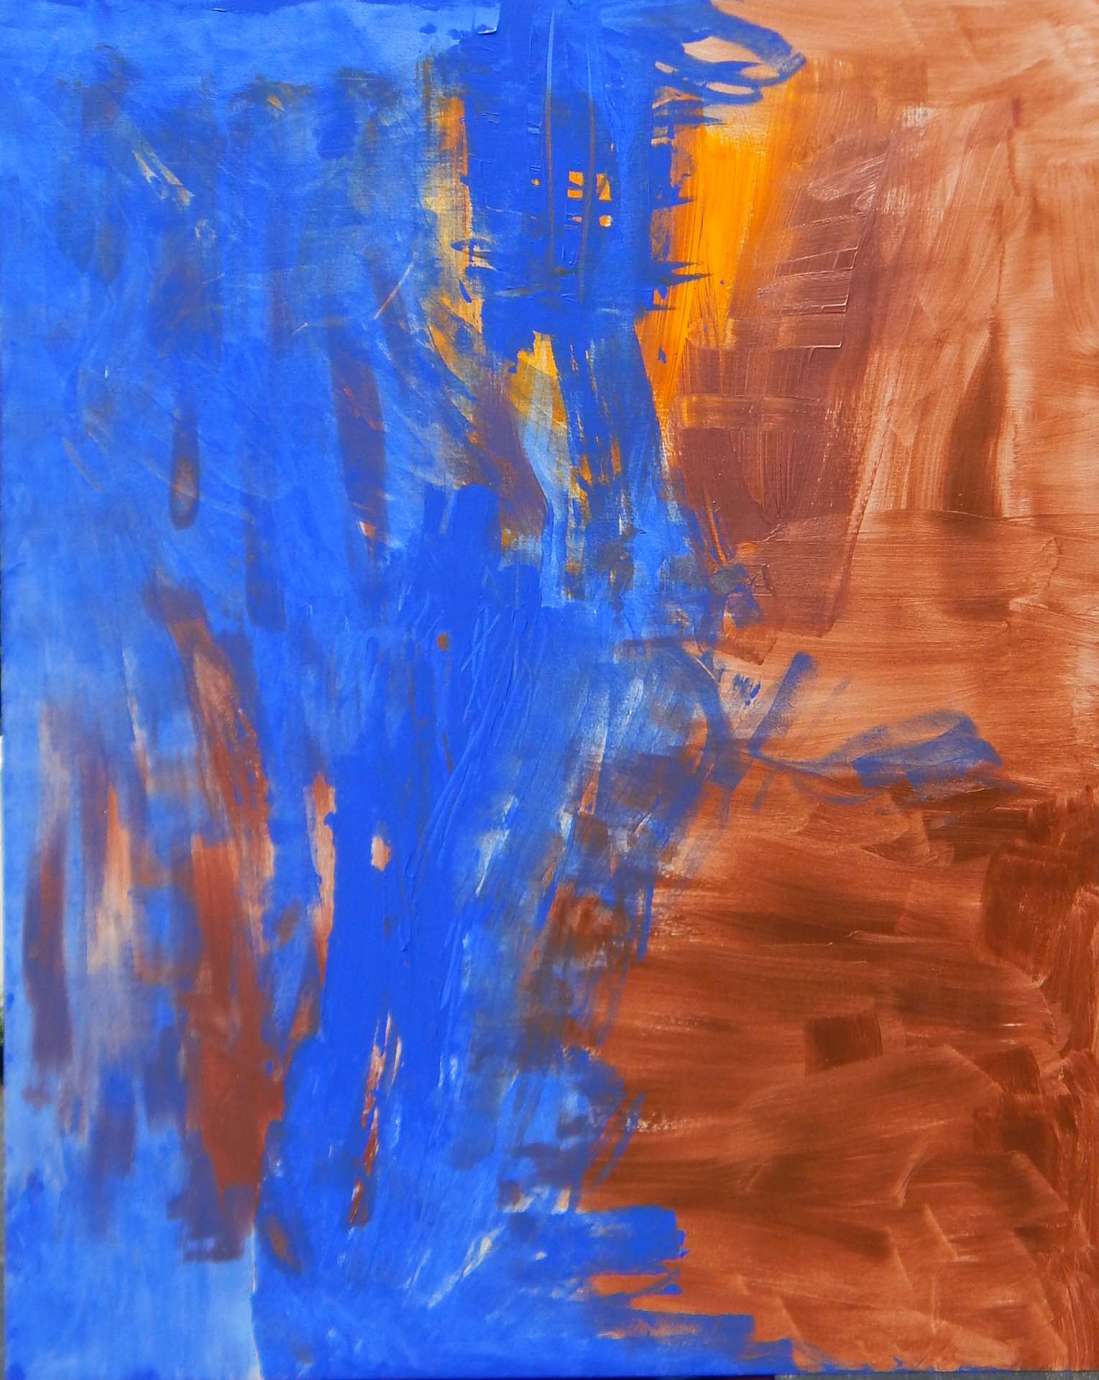 An abstract painting by Wiley Johnson featuring blue on the left and orange on the right meeting in the middle